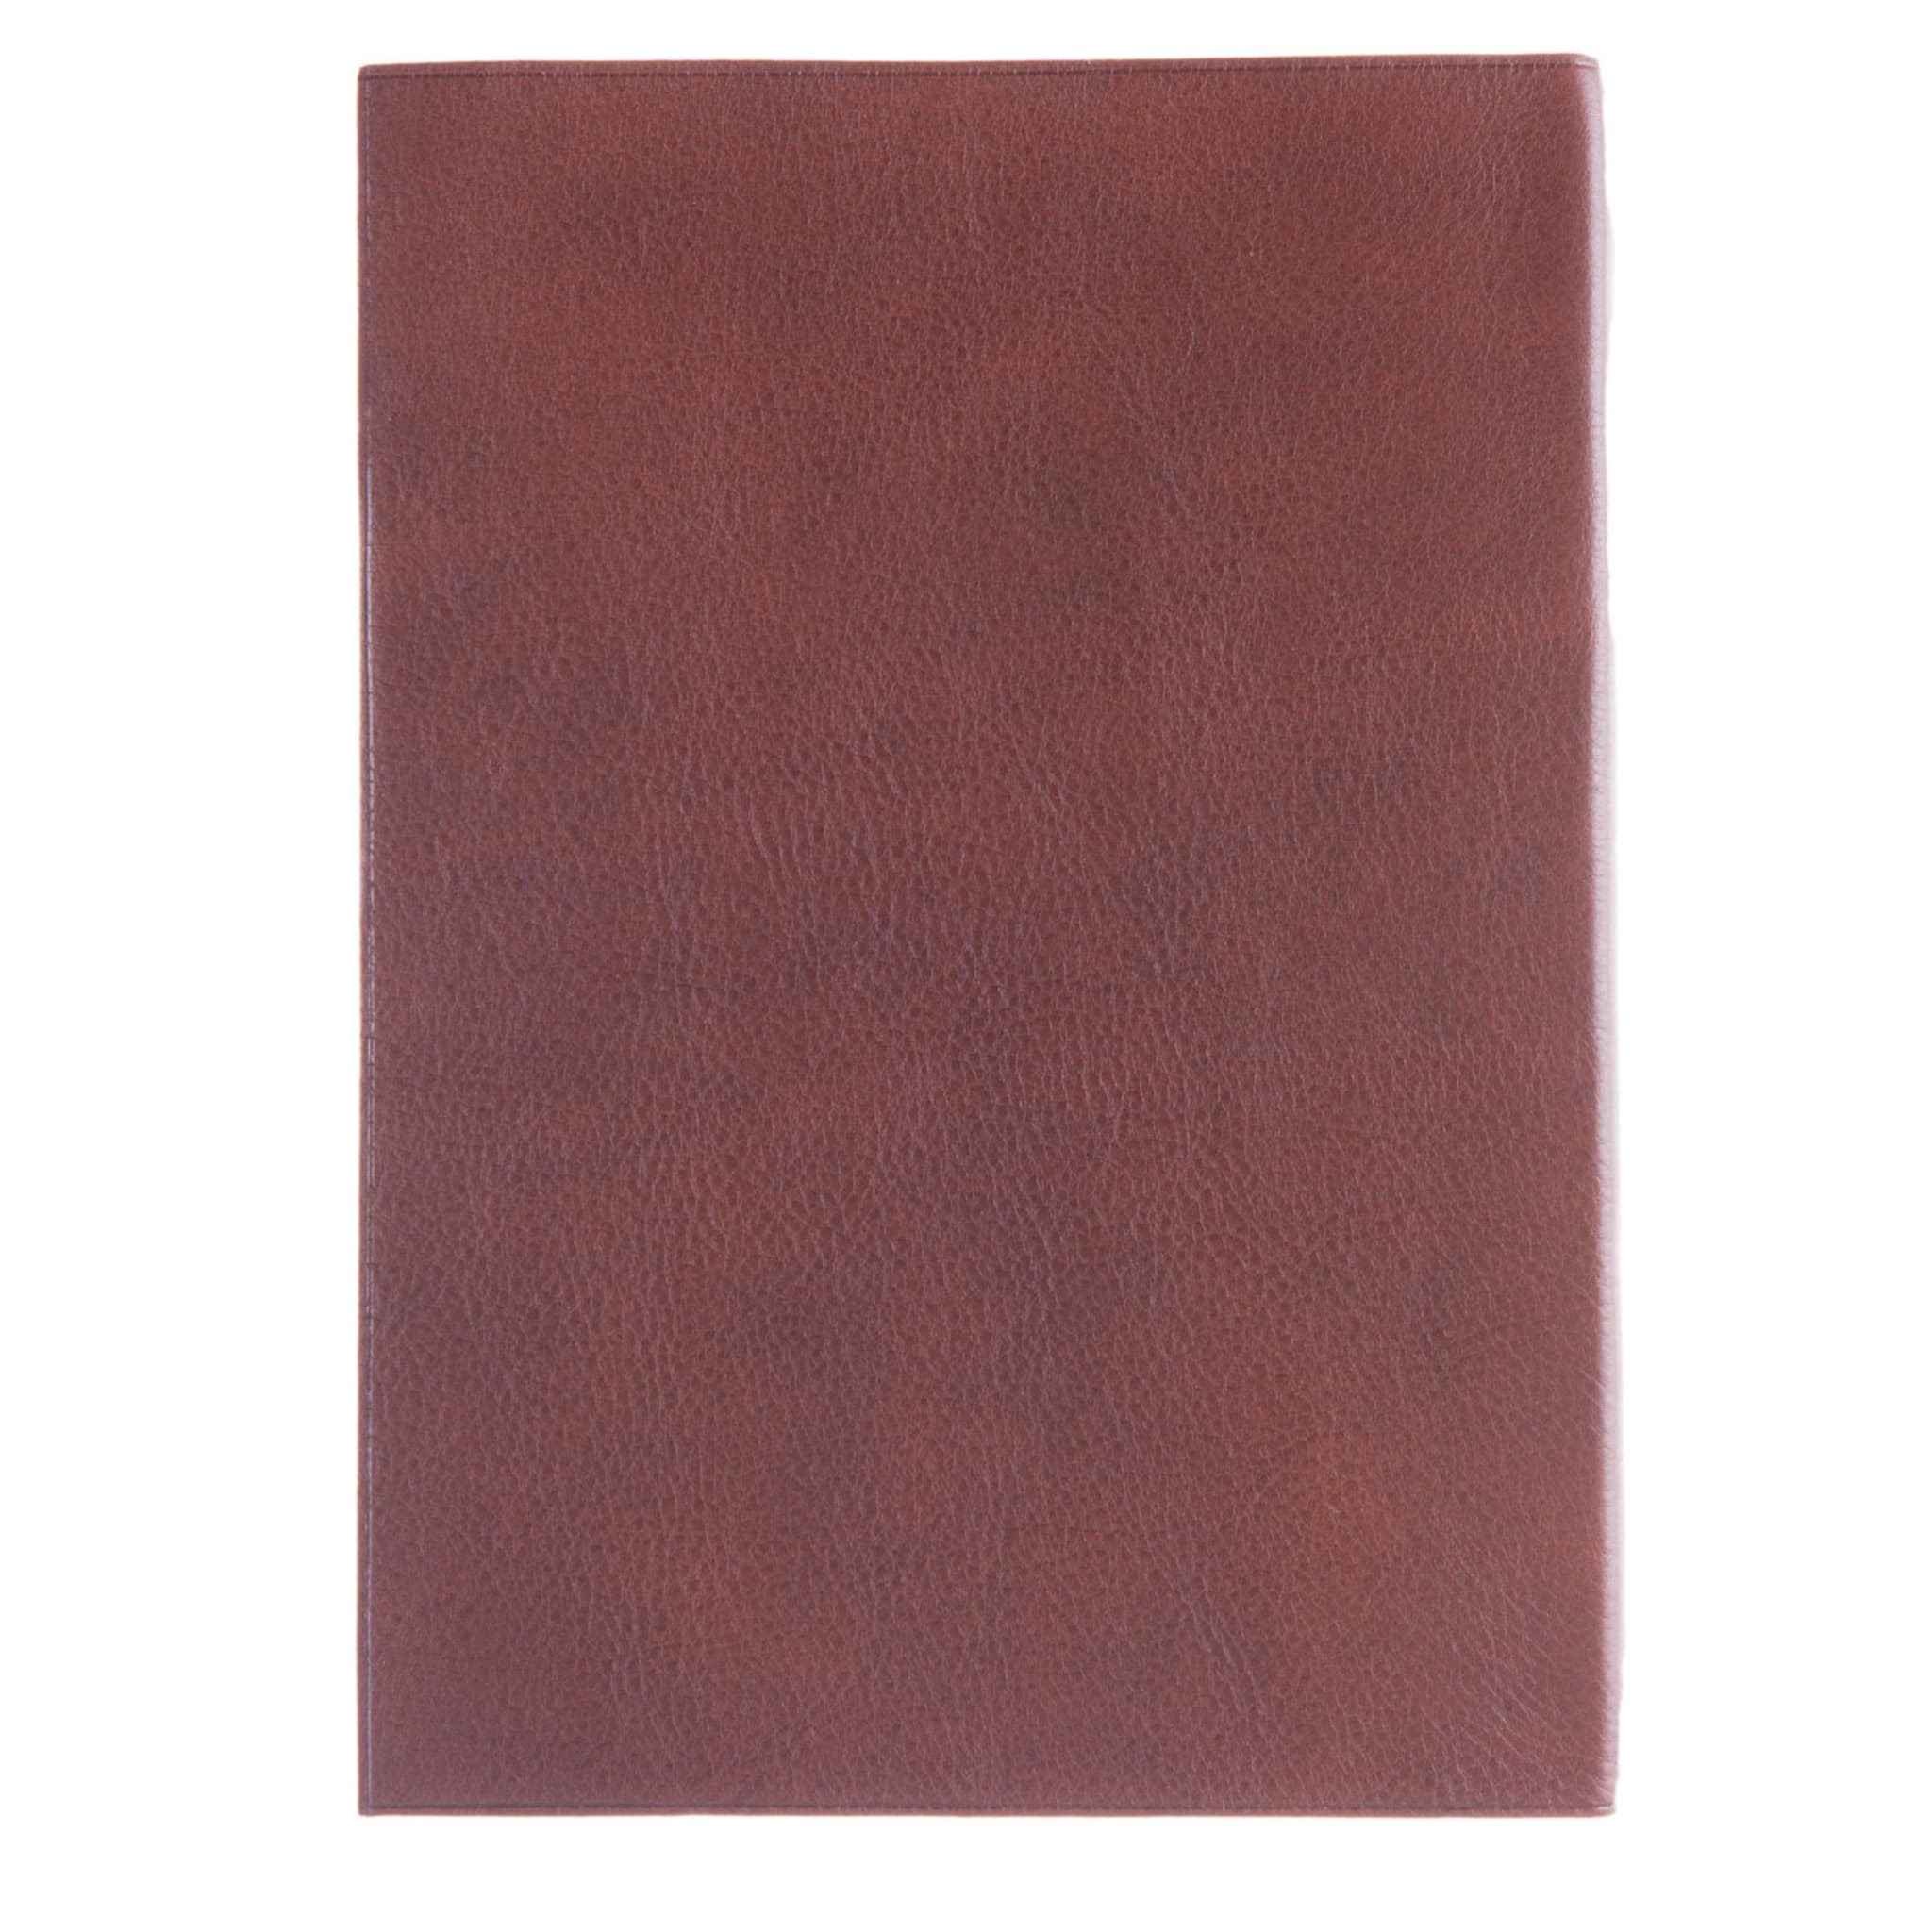 Brown Leather Notebook - Alternative view 1